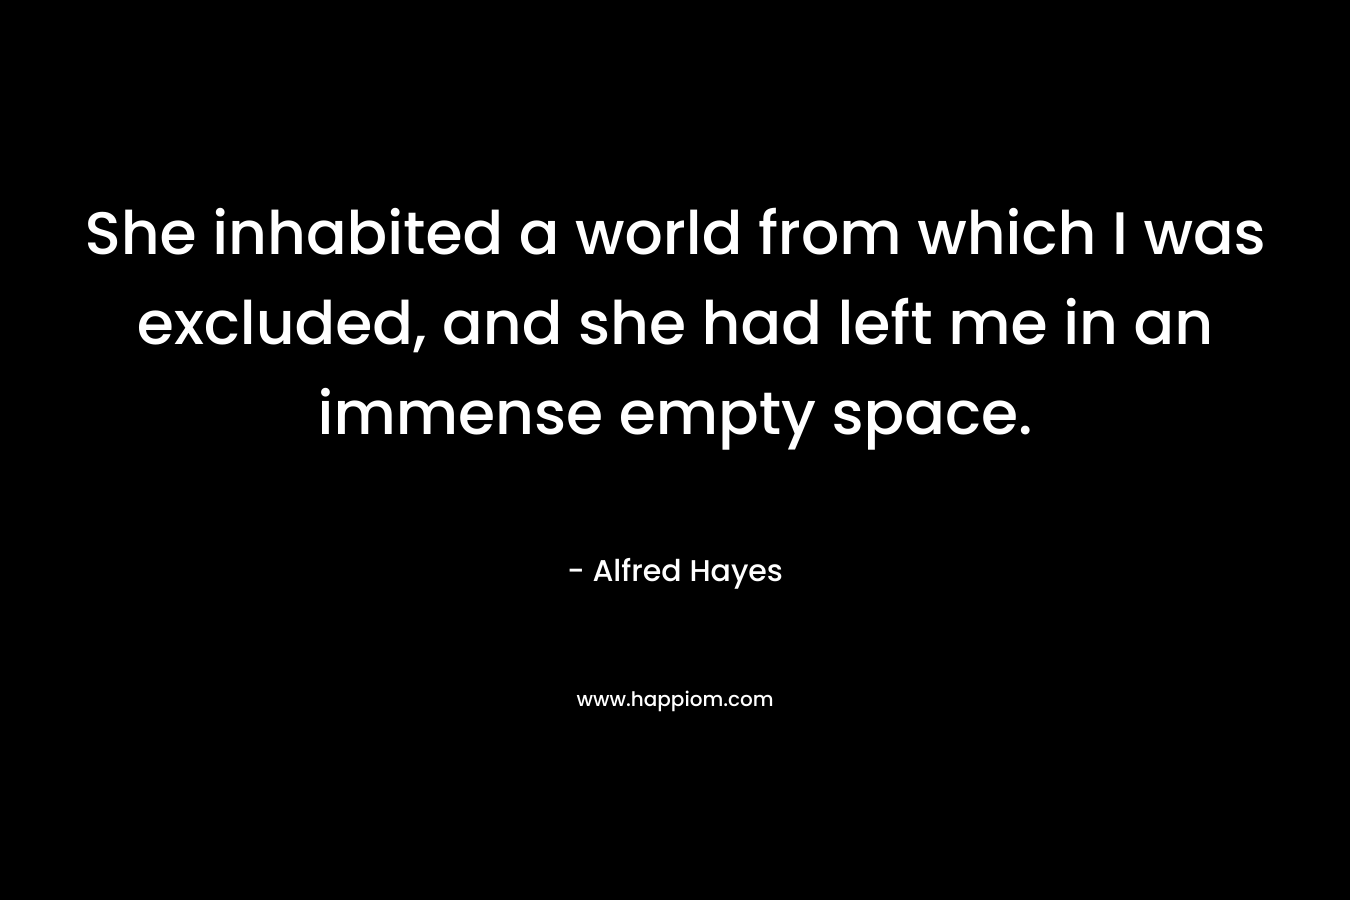 She inhabited a world from which I was excluded, and she had left me in an immense empty space. – Alfred Hayes